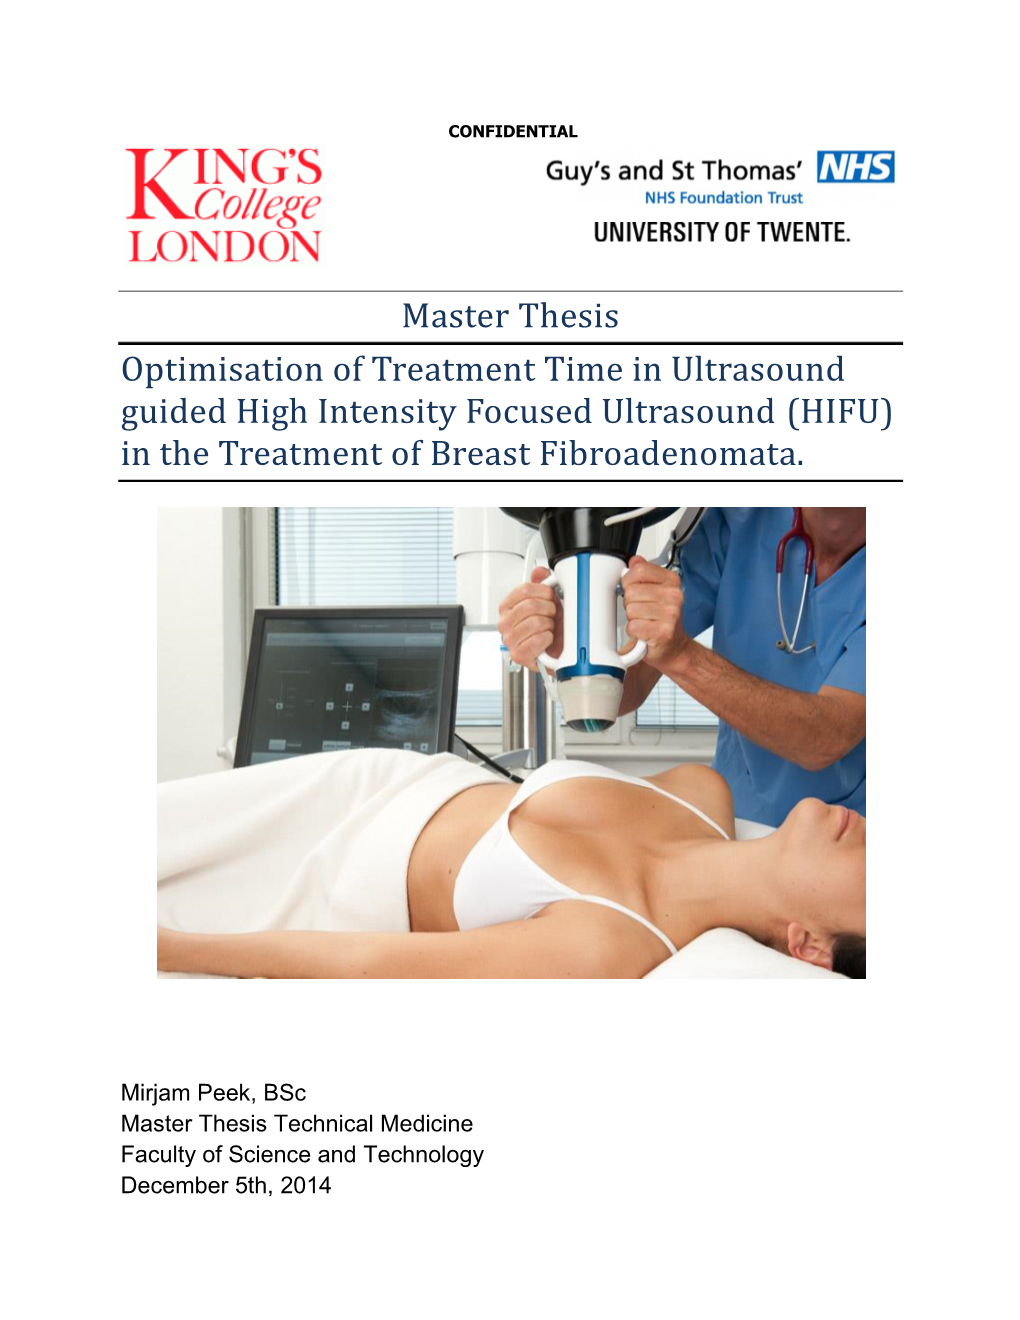 Master Thesis Optimisation of Treatment Time in Ultrasound Guided High Intensity Focused Ultrasound (HIFU) in the Treatment of Breast Fibroadenomata